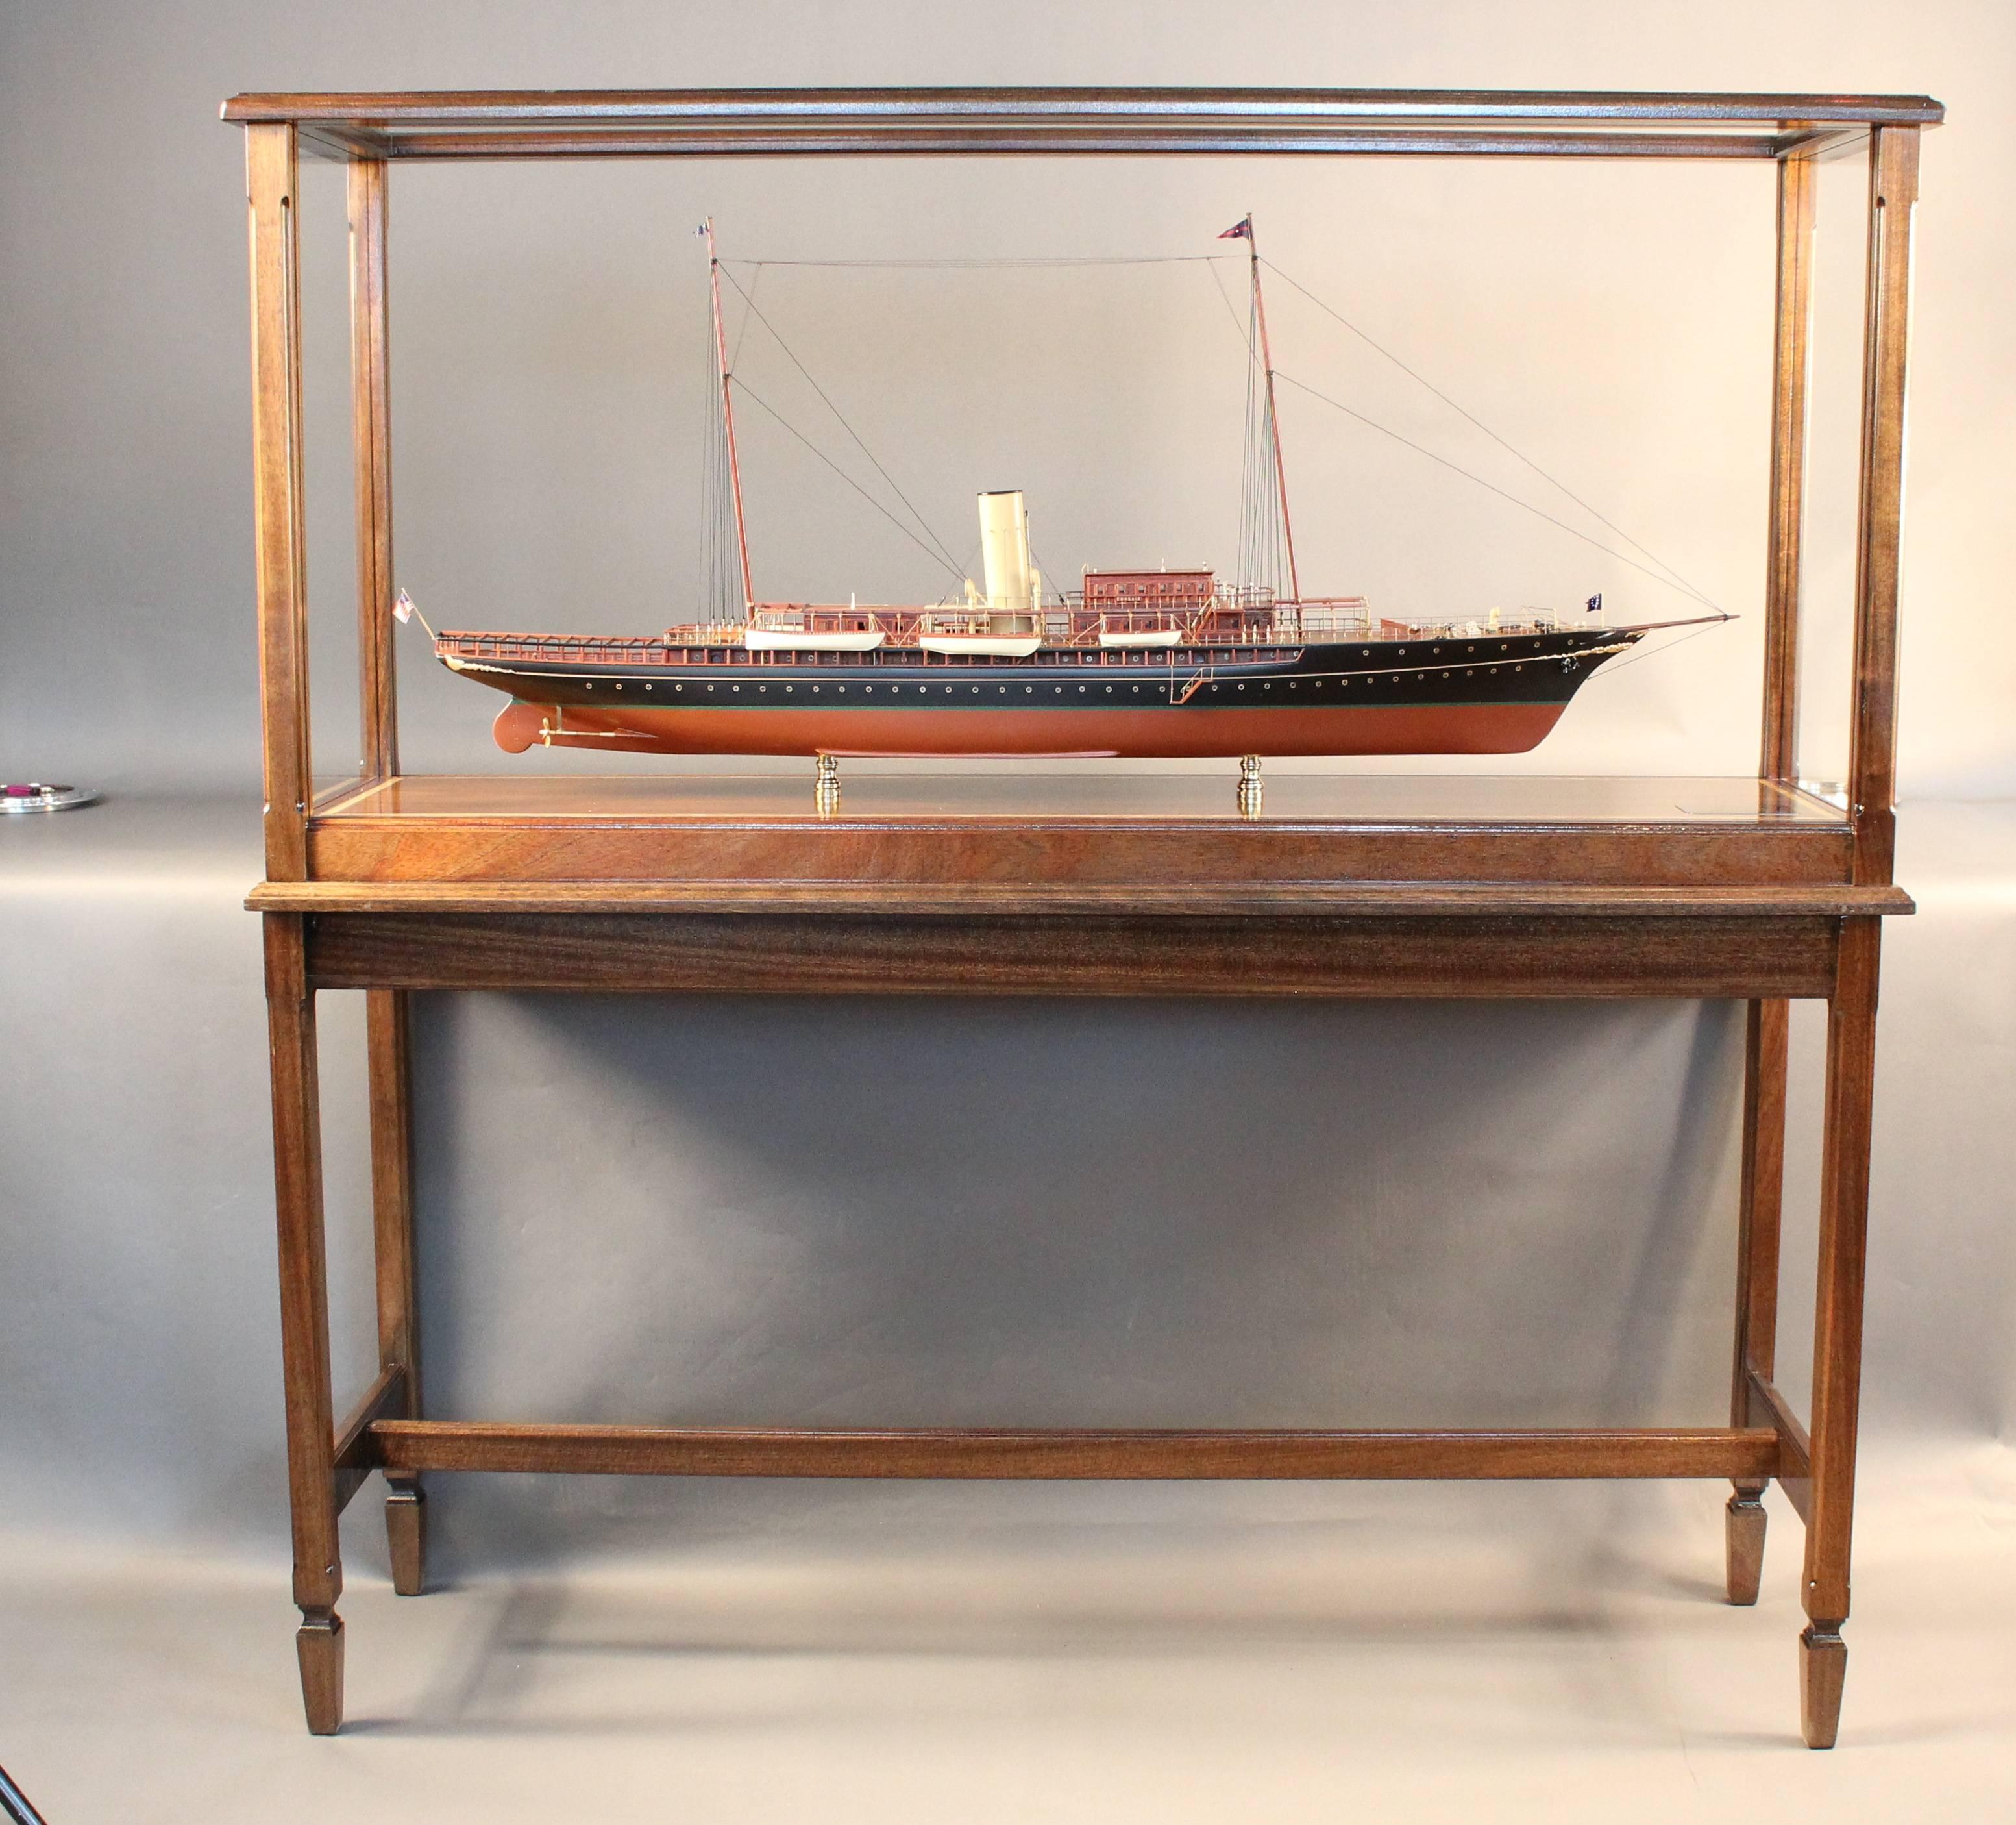 Steam yacht model of J.P. Morgan's "Corsair IV" mounted into a custom glass and mahogany display case with table. 
This model is outfitted with raised paneled mahogany cabins, planked deck, turned brass fittings, rigged masts etc...